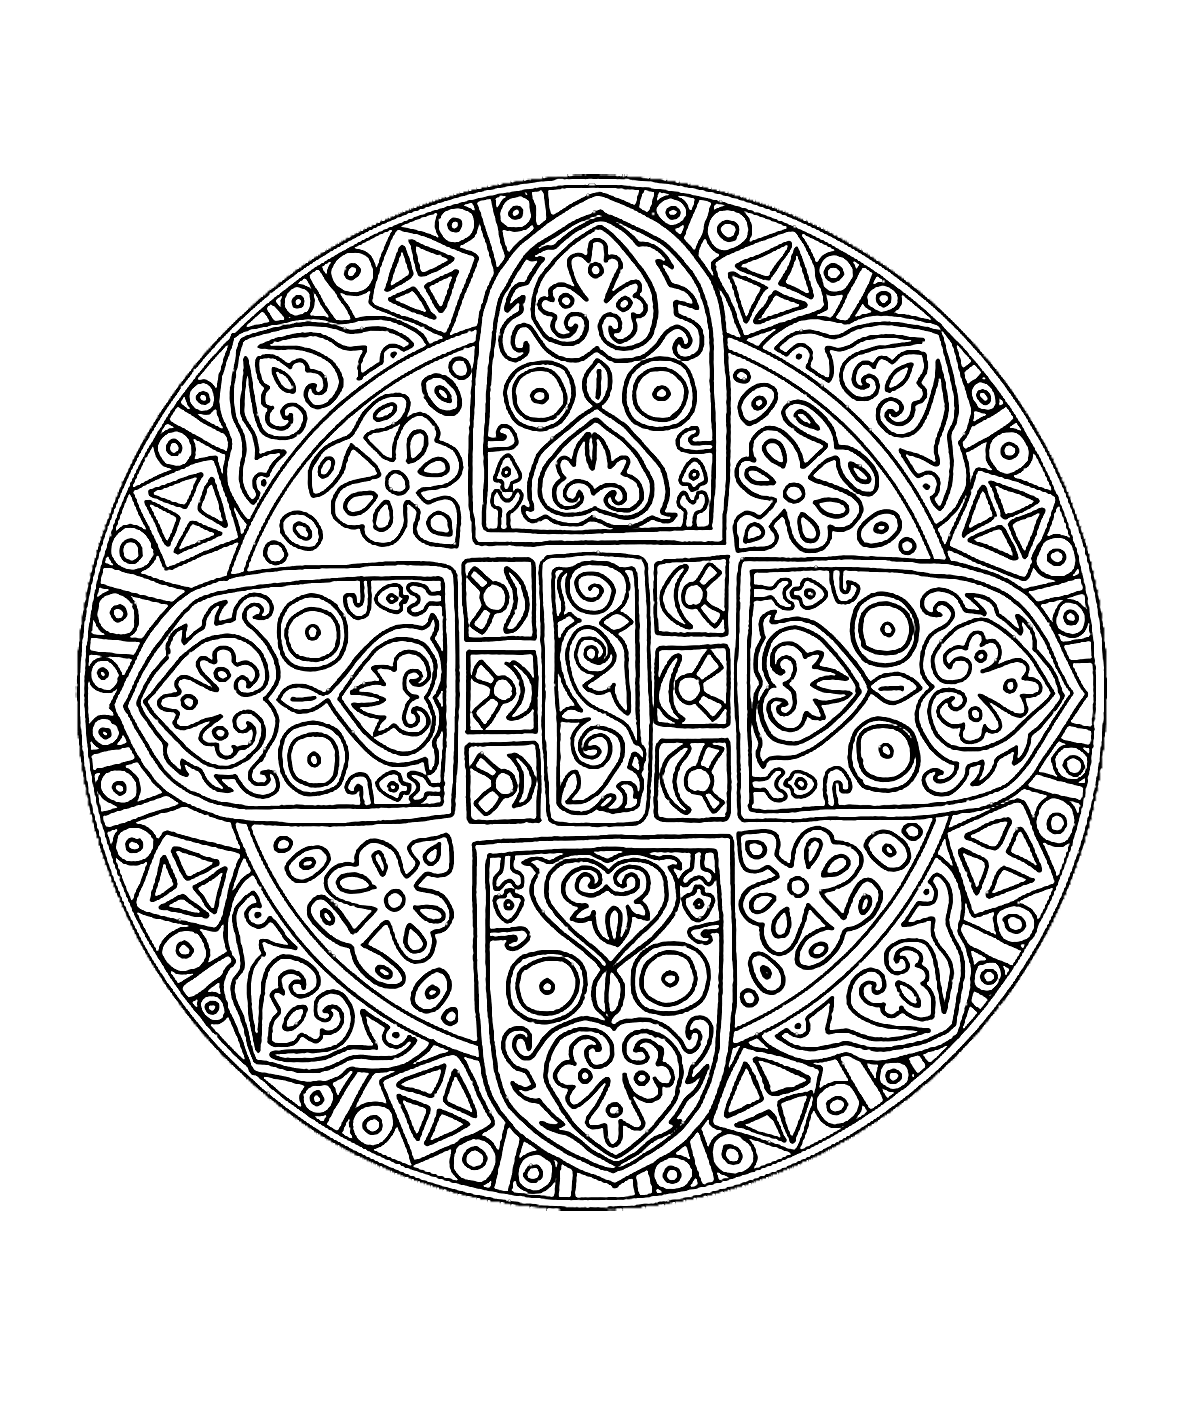 Difficult Mandalas (for adults) : mandala-to-color-adult-difficult 